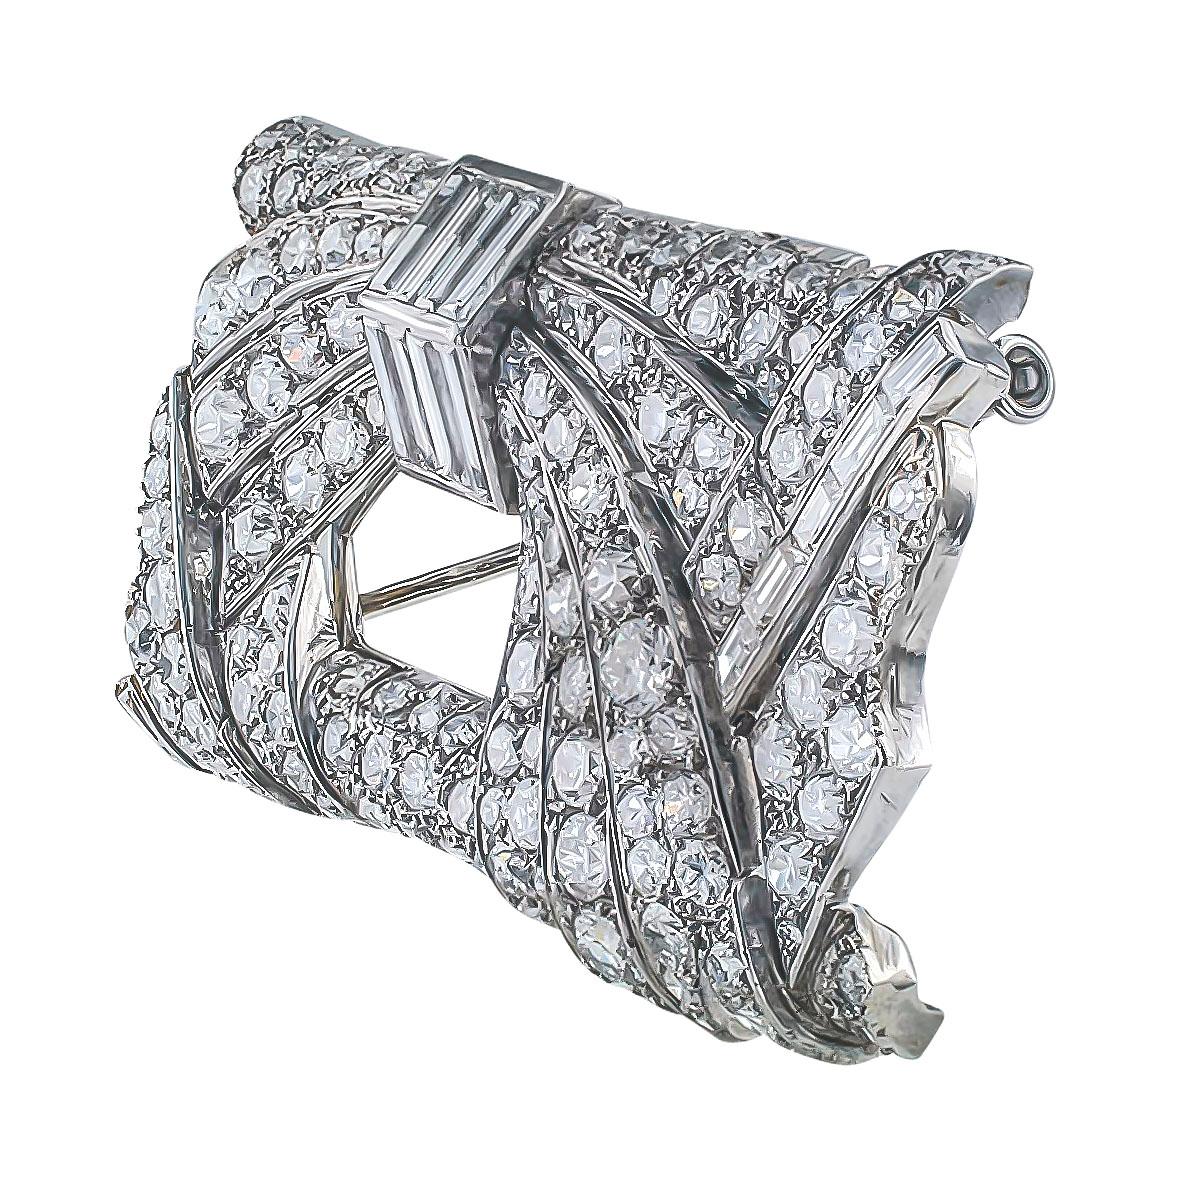 Art Deco Diamond and platinum brooch circa 1930.

DETAILS:
Art Deco 10.00 carats diamond and platinum brooch.
DIAMONDS: one hundred forty-six baguette and circular-cut diamonds totaling approximately 10.00 carats, approximately G – H – I color and